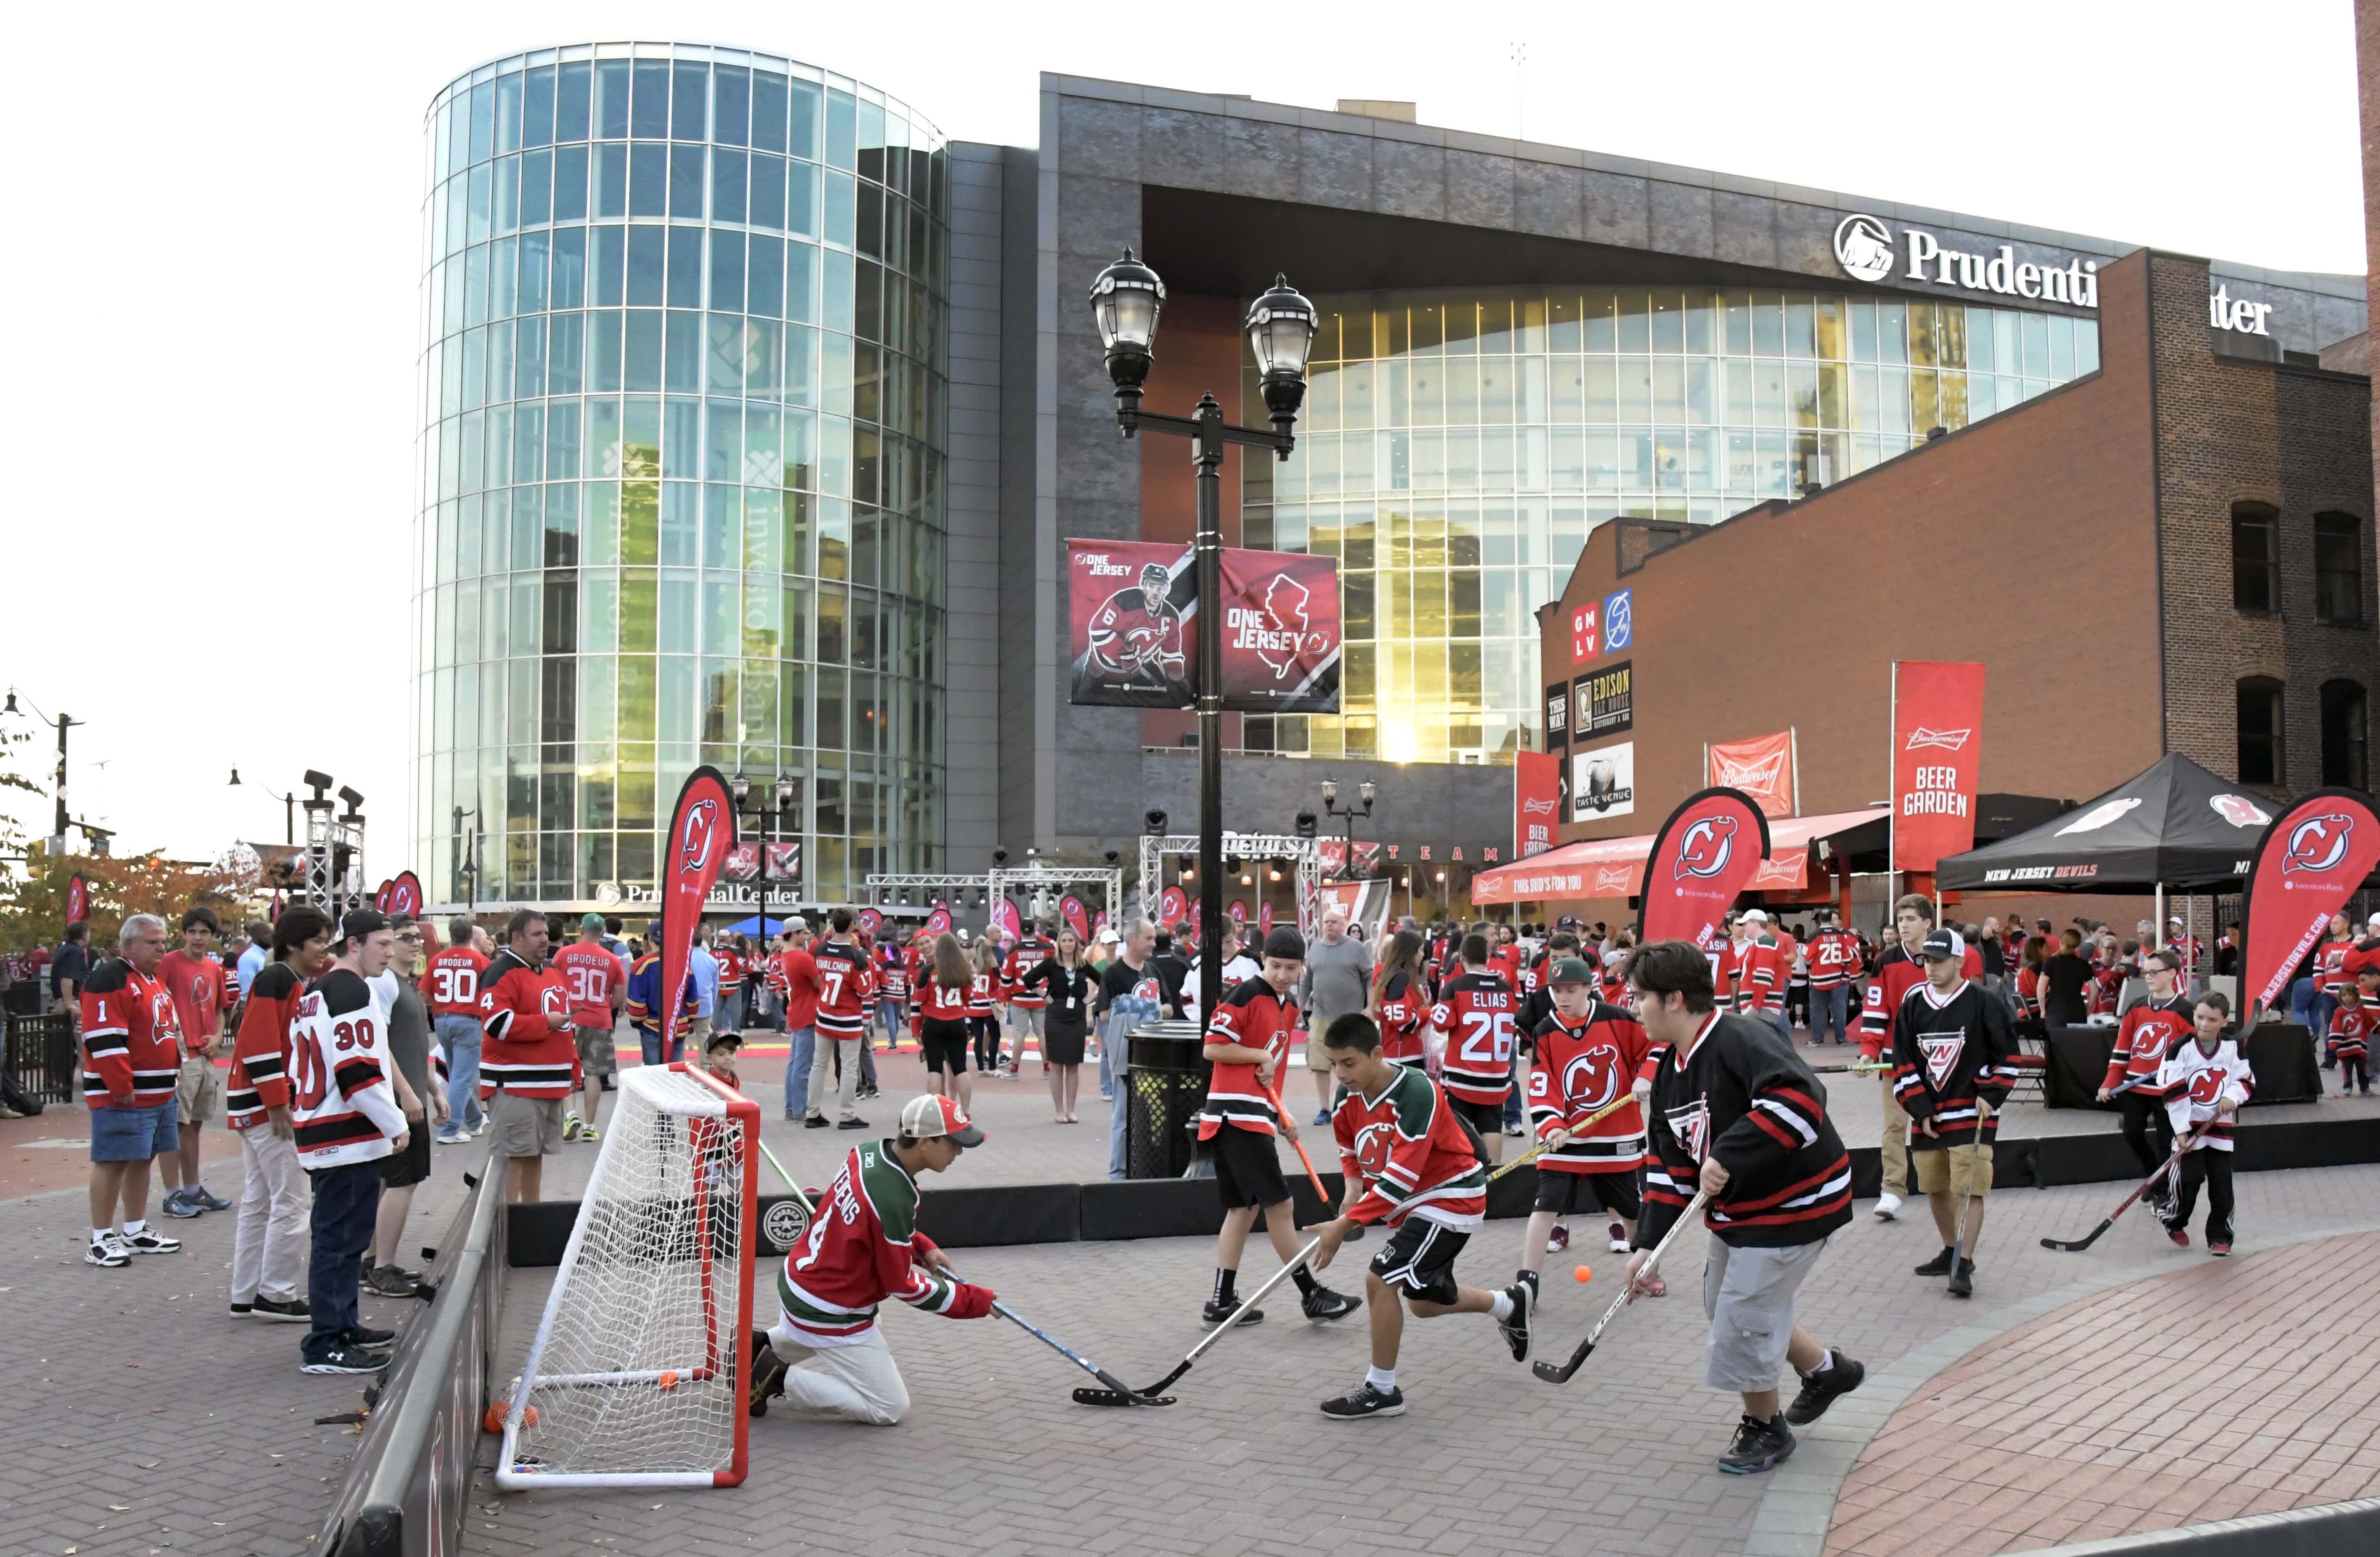 Fans play street hockey outside the Prudential Center before the New Jersey Devils' NHL hockey home-opener against the Anaheim Ducks, Tuesday, Oct. 18, 2016, in Newark, N.J. (AP Photo/Bill Kostroun)